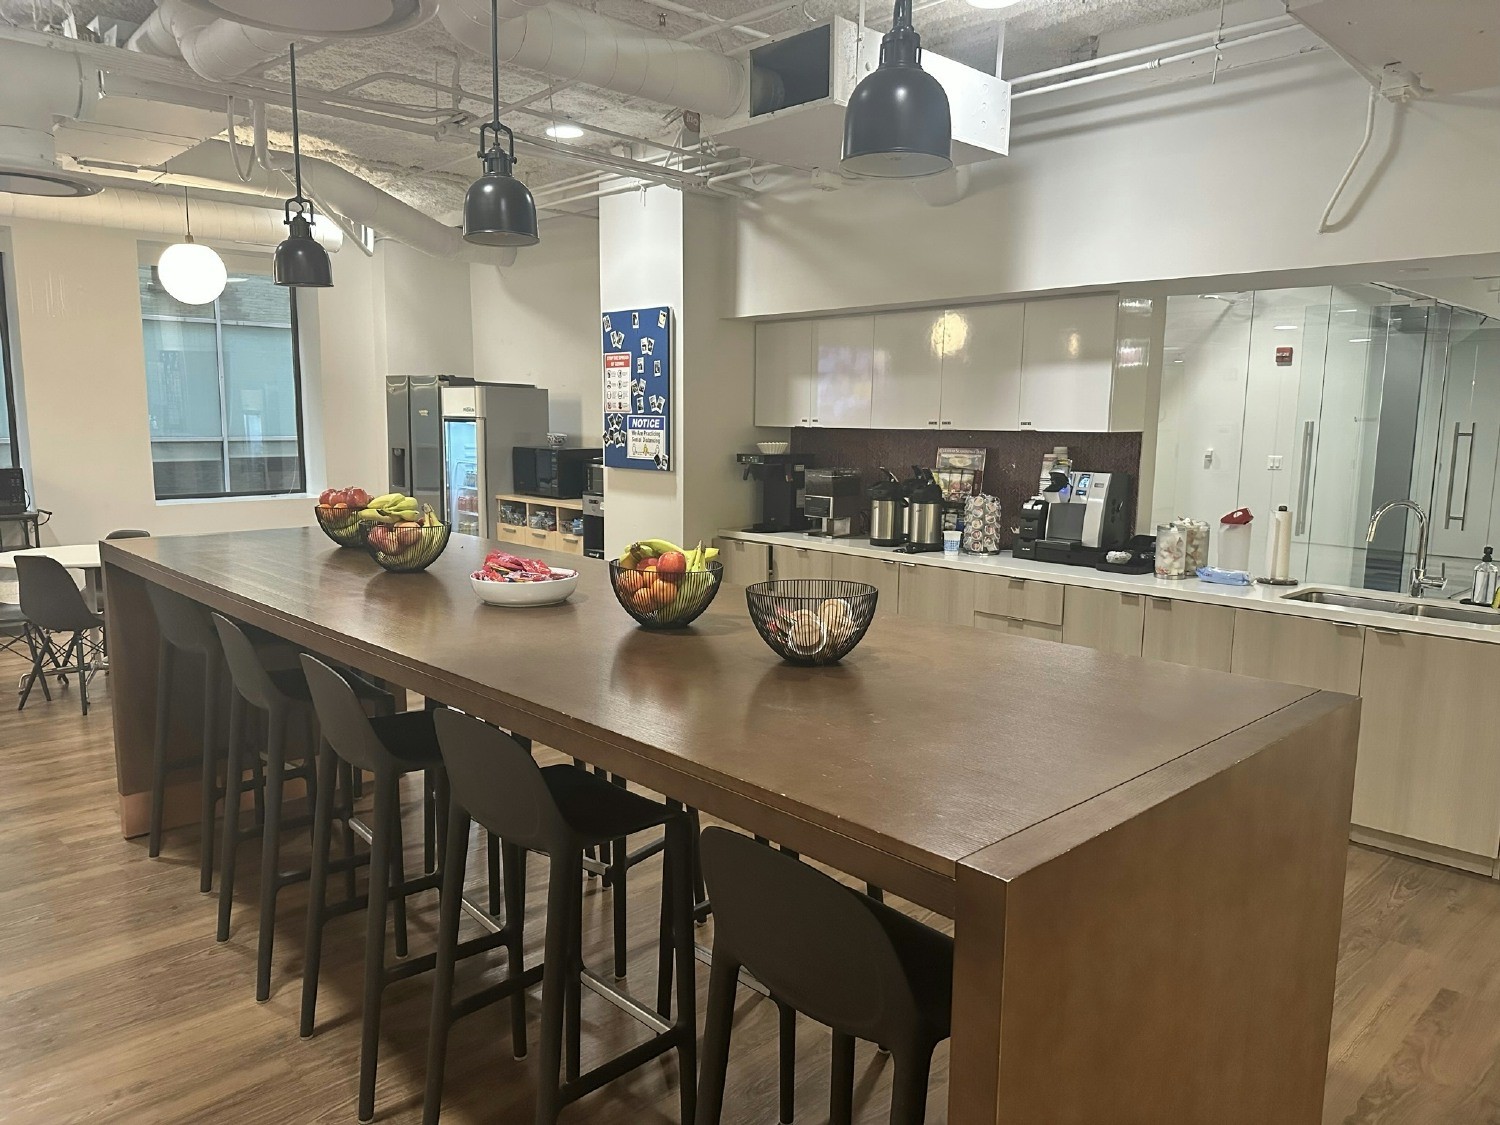 NinjaTrader's Headquarters provides plenty of space for snacking, caffeinating and mingling.